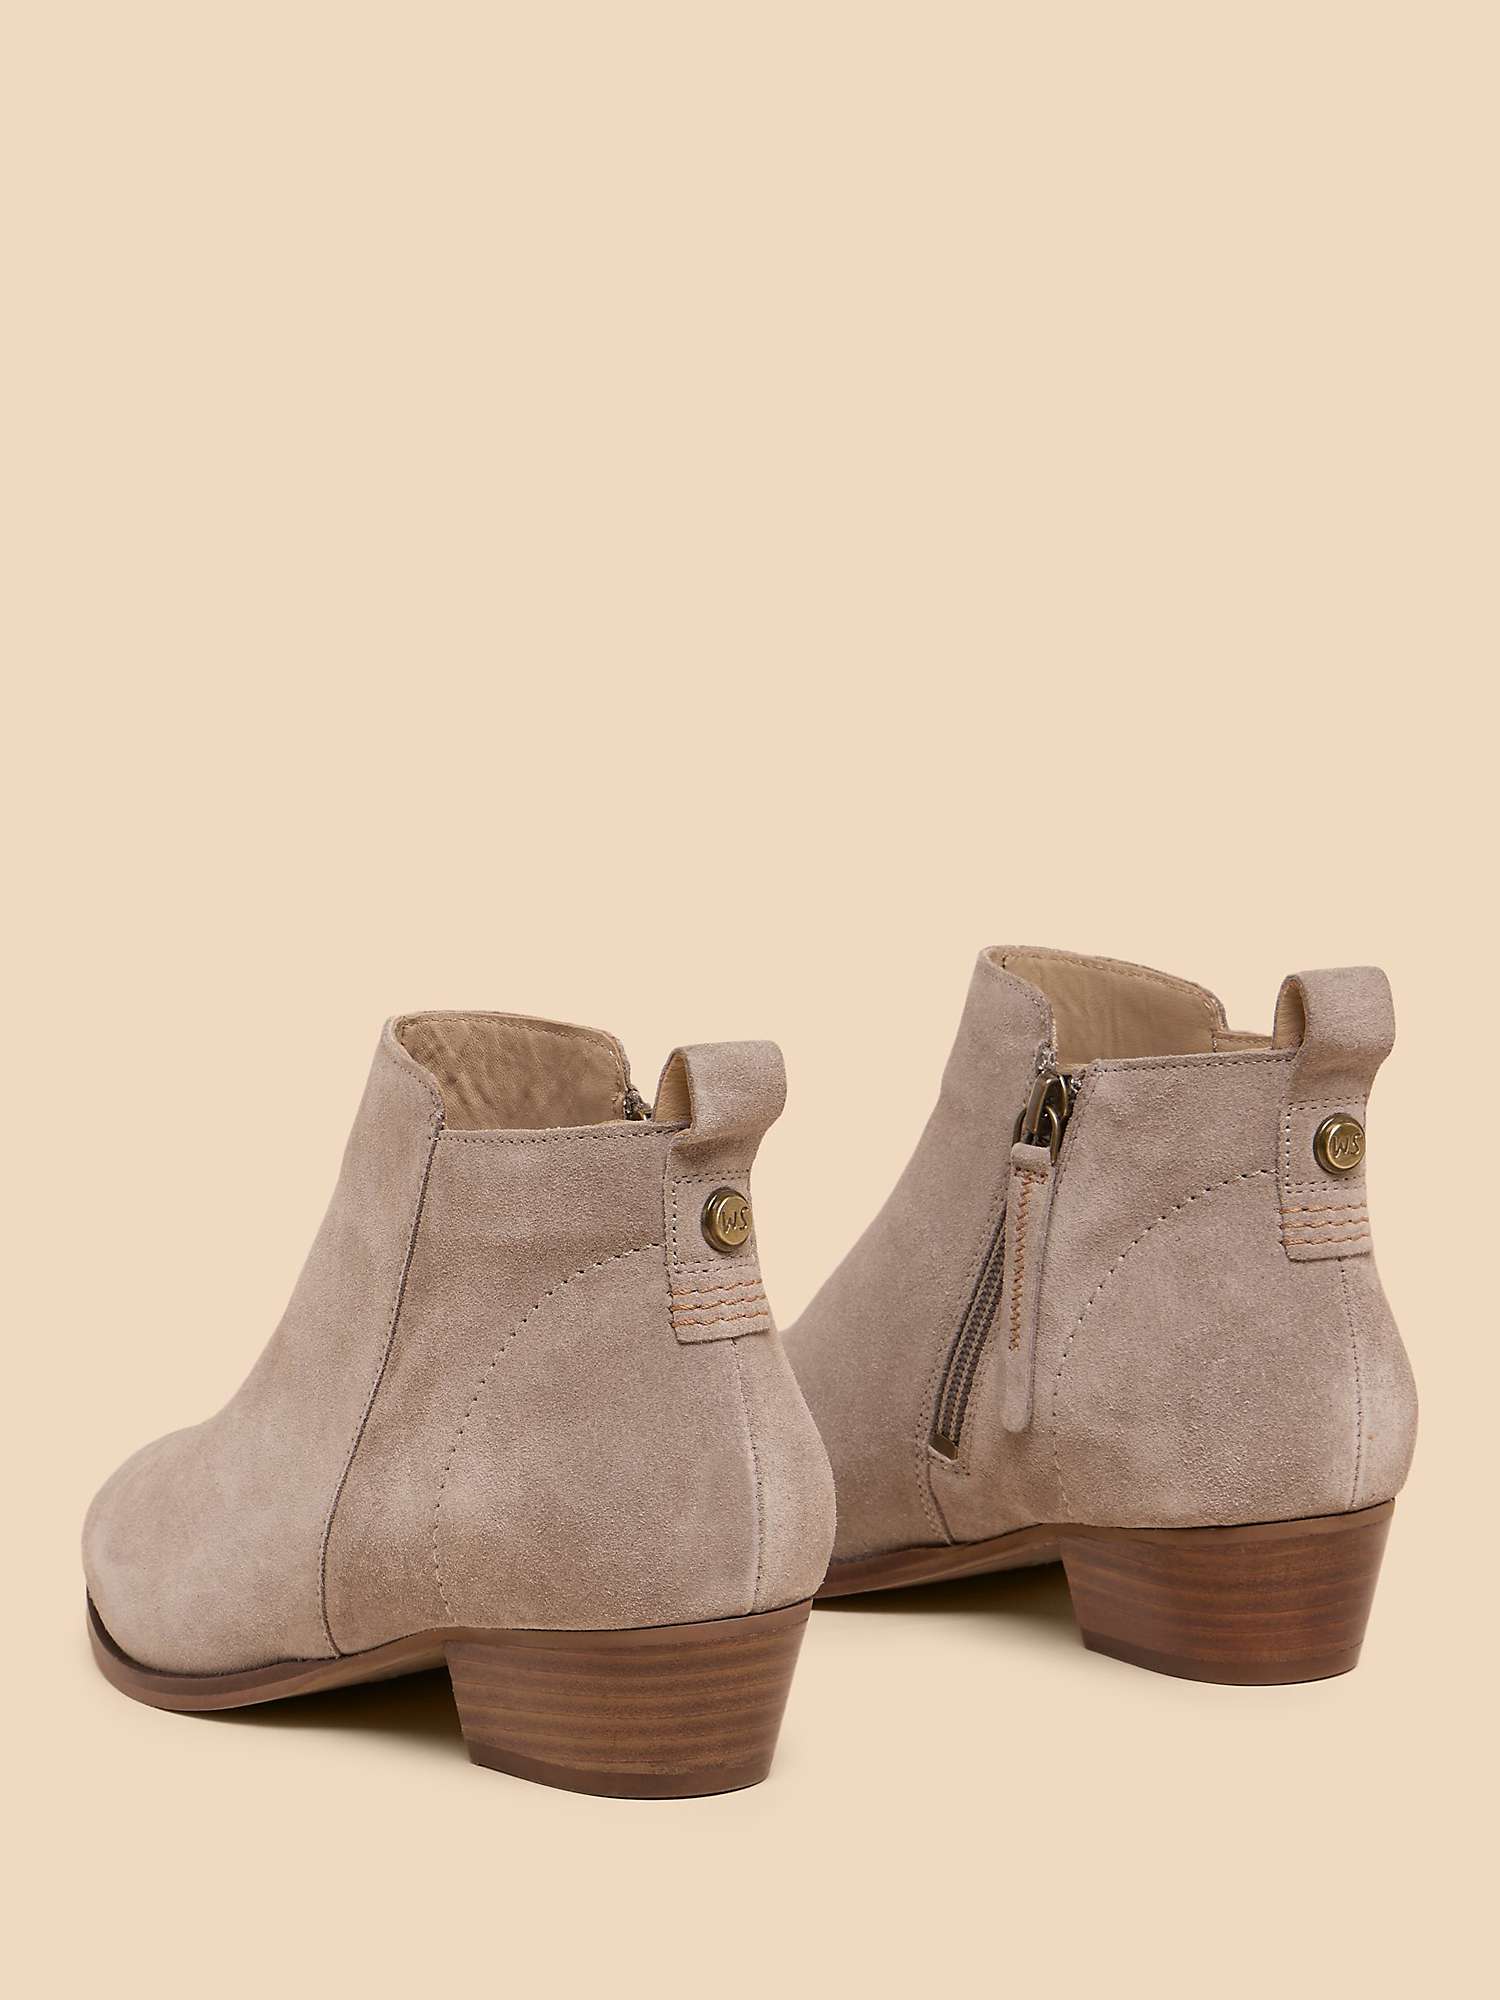 Buy White Stuff Suede Ankle Boots, Light Grey Online at johnlewis.com